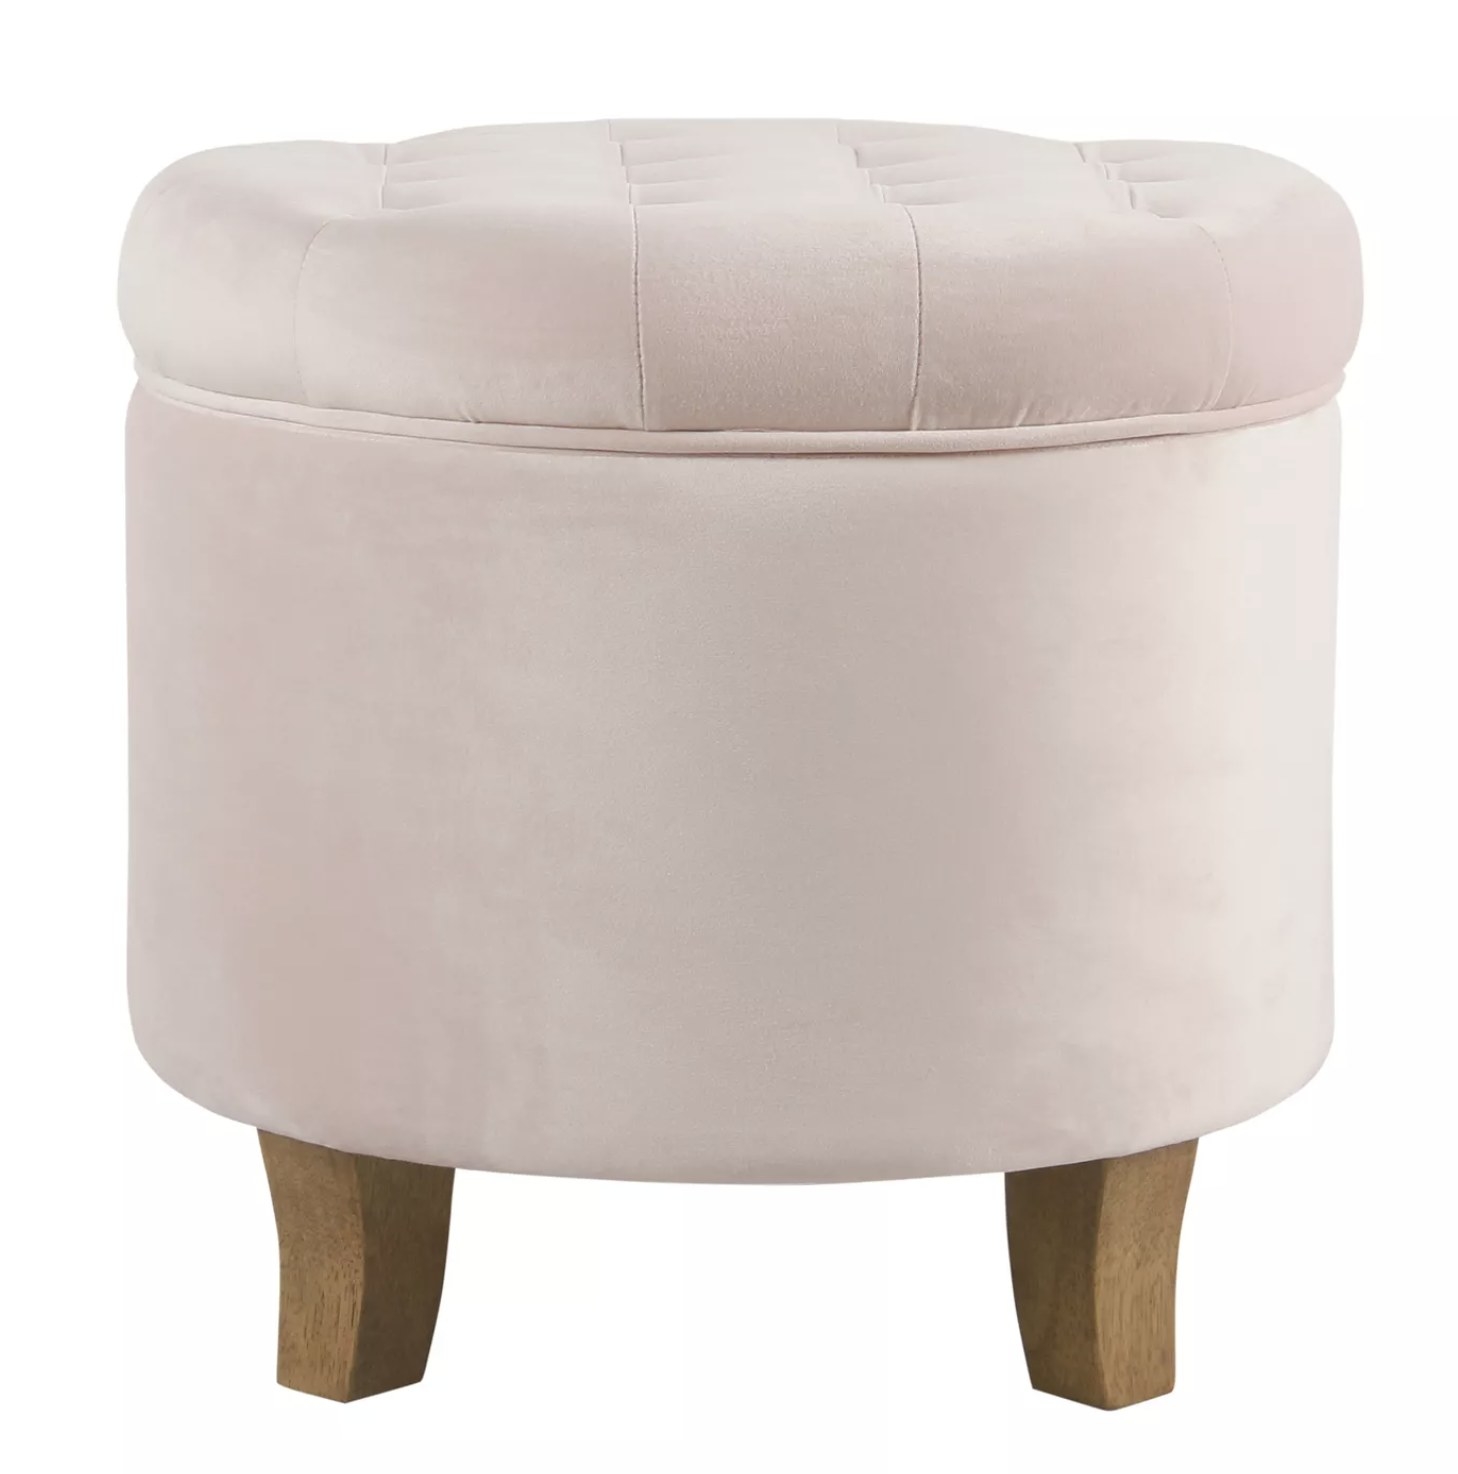 A velvet blush pink round storage ottoman with a tufted lid and wooden legs